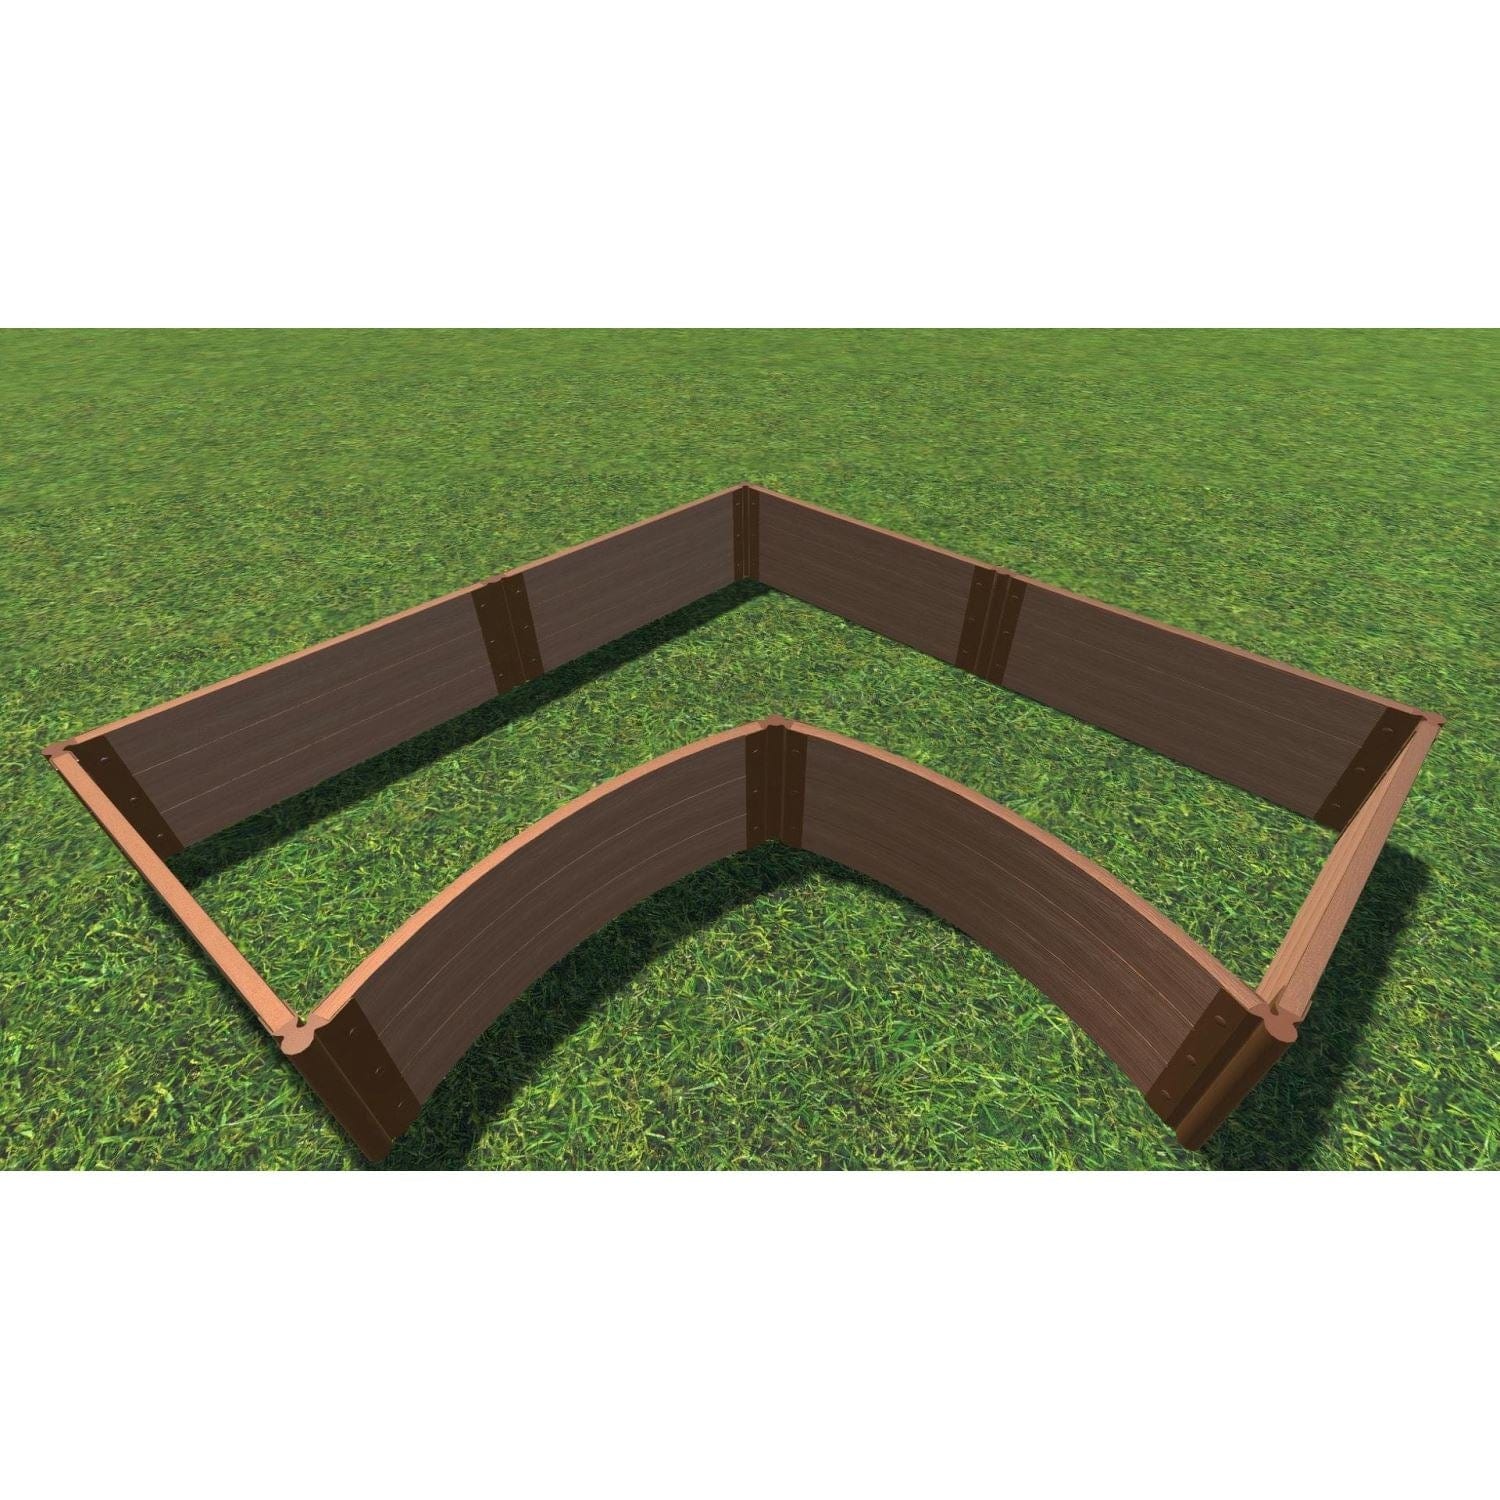 Frame It All Gardening Accessories 1" Frame It All | Tool-Free Grand Concourse Interior Curved Corner Raised Garden Bed 8' X 8' X 16.5" - Classic Sienna 800003026